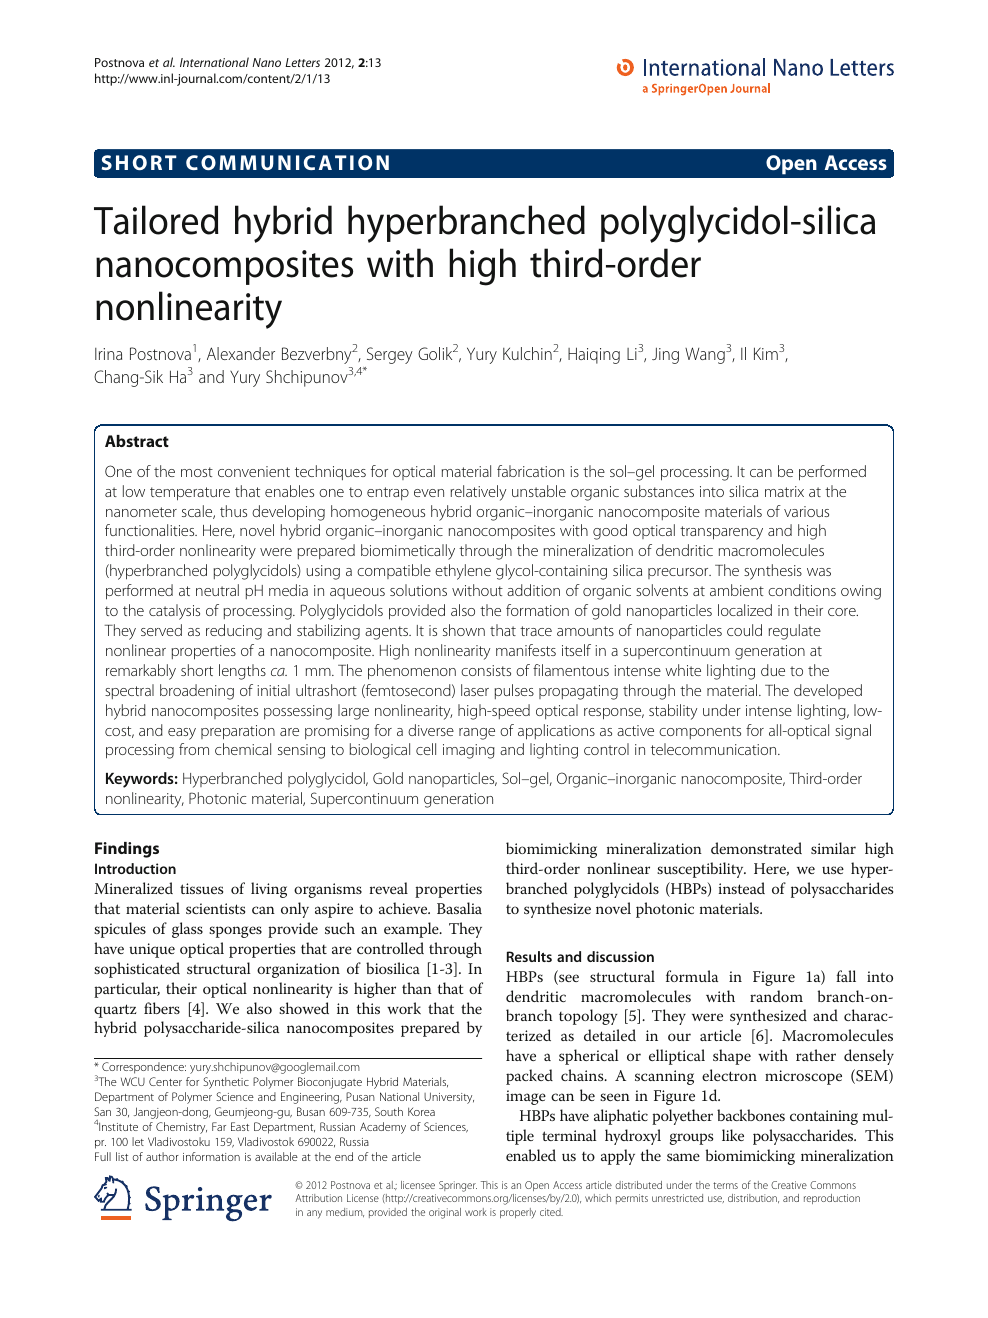 Tailored Hybrid Hyperbranched Polyglycidol Silica Nanocomposites With High Third Order Nonlinearity Topic Of Research Paper In Nano Technology Download Scholarly Article Pdf And Read For Free On Cyberleninka Open Science Hub